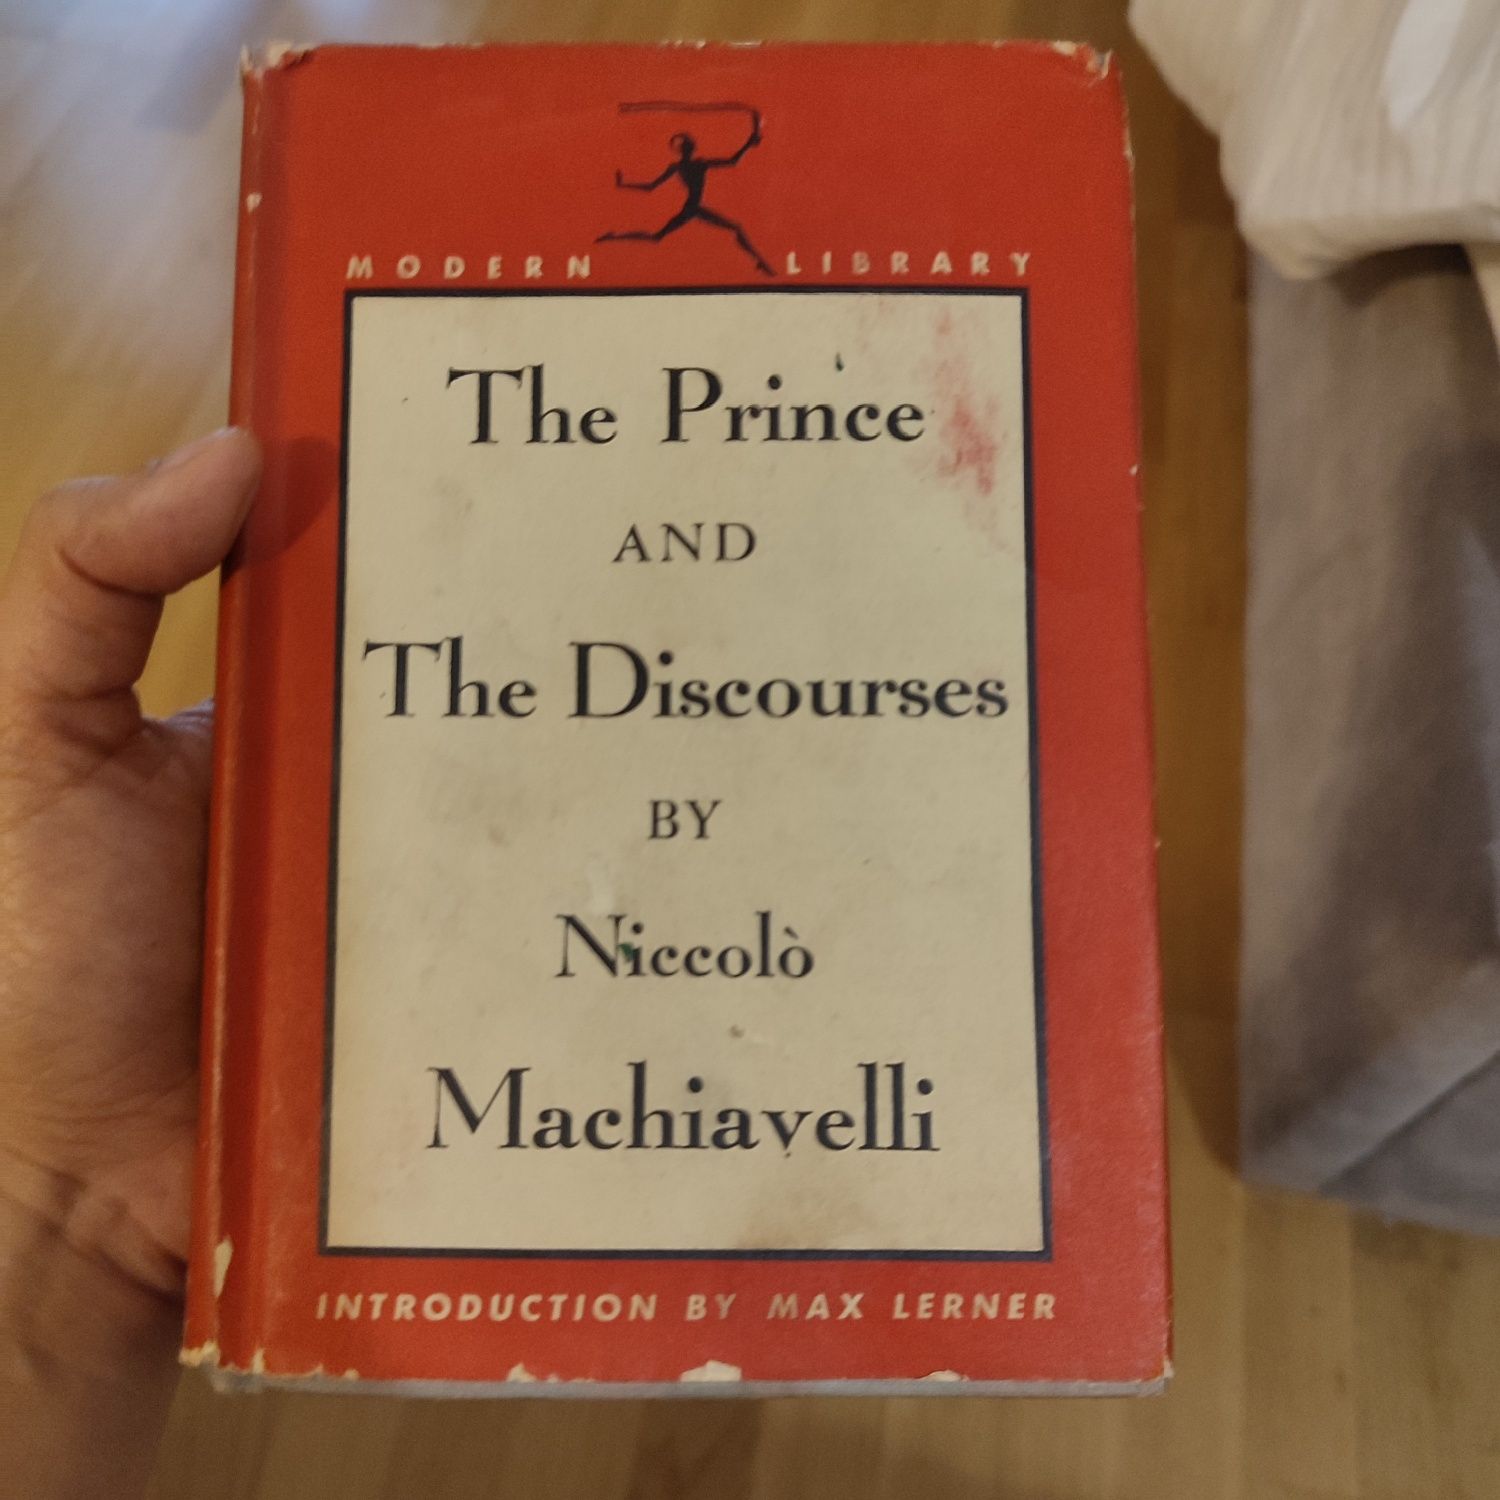 The Prince and The Discourses by Niccolo Machiavelli